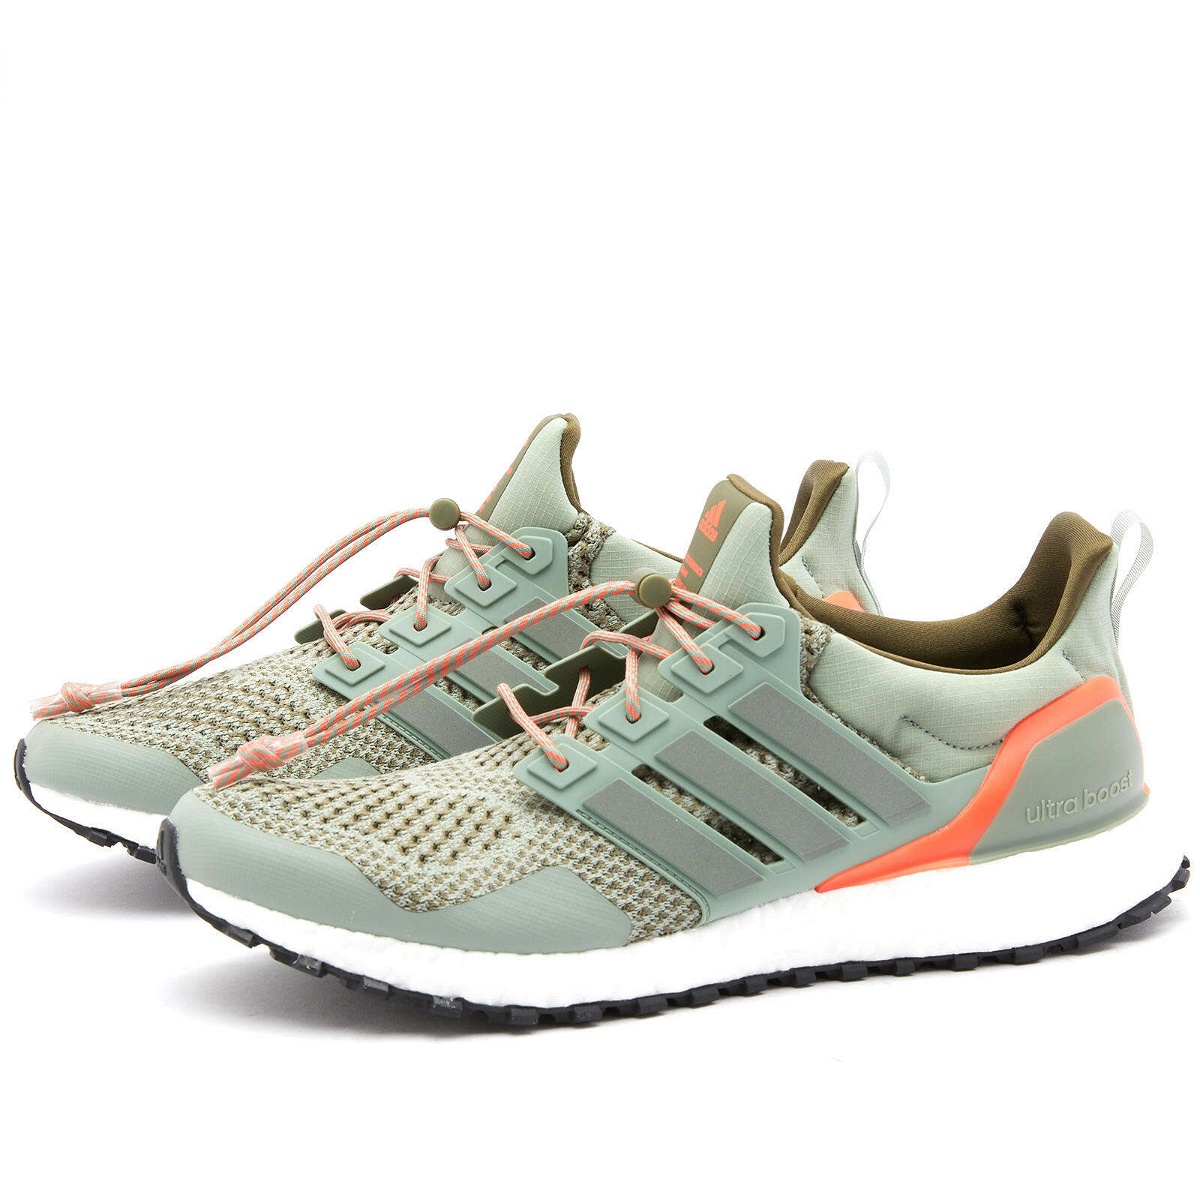 Adidas Men's Ultraboost 1.0 Sneakers in Silver Green/Olive Strata adidas